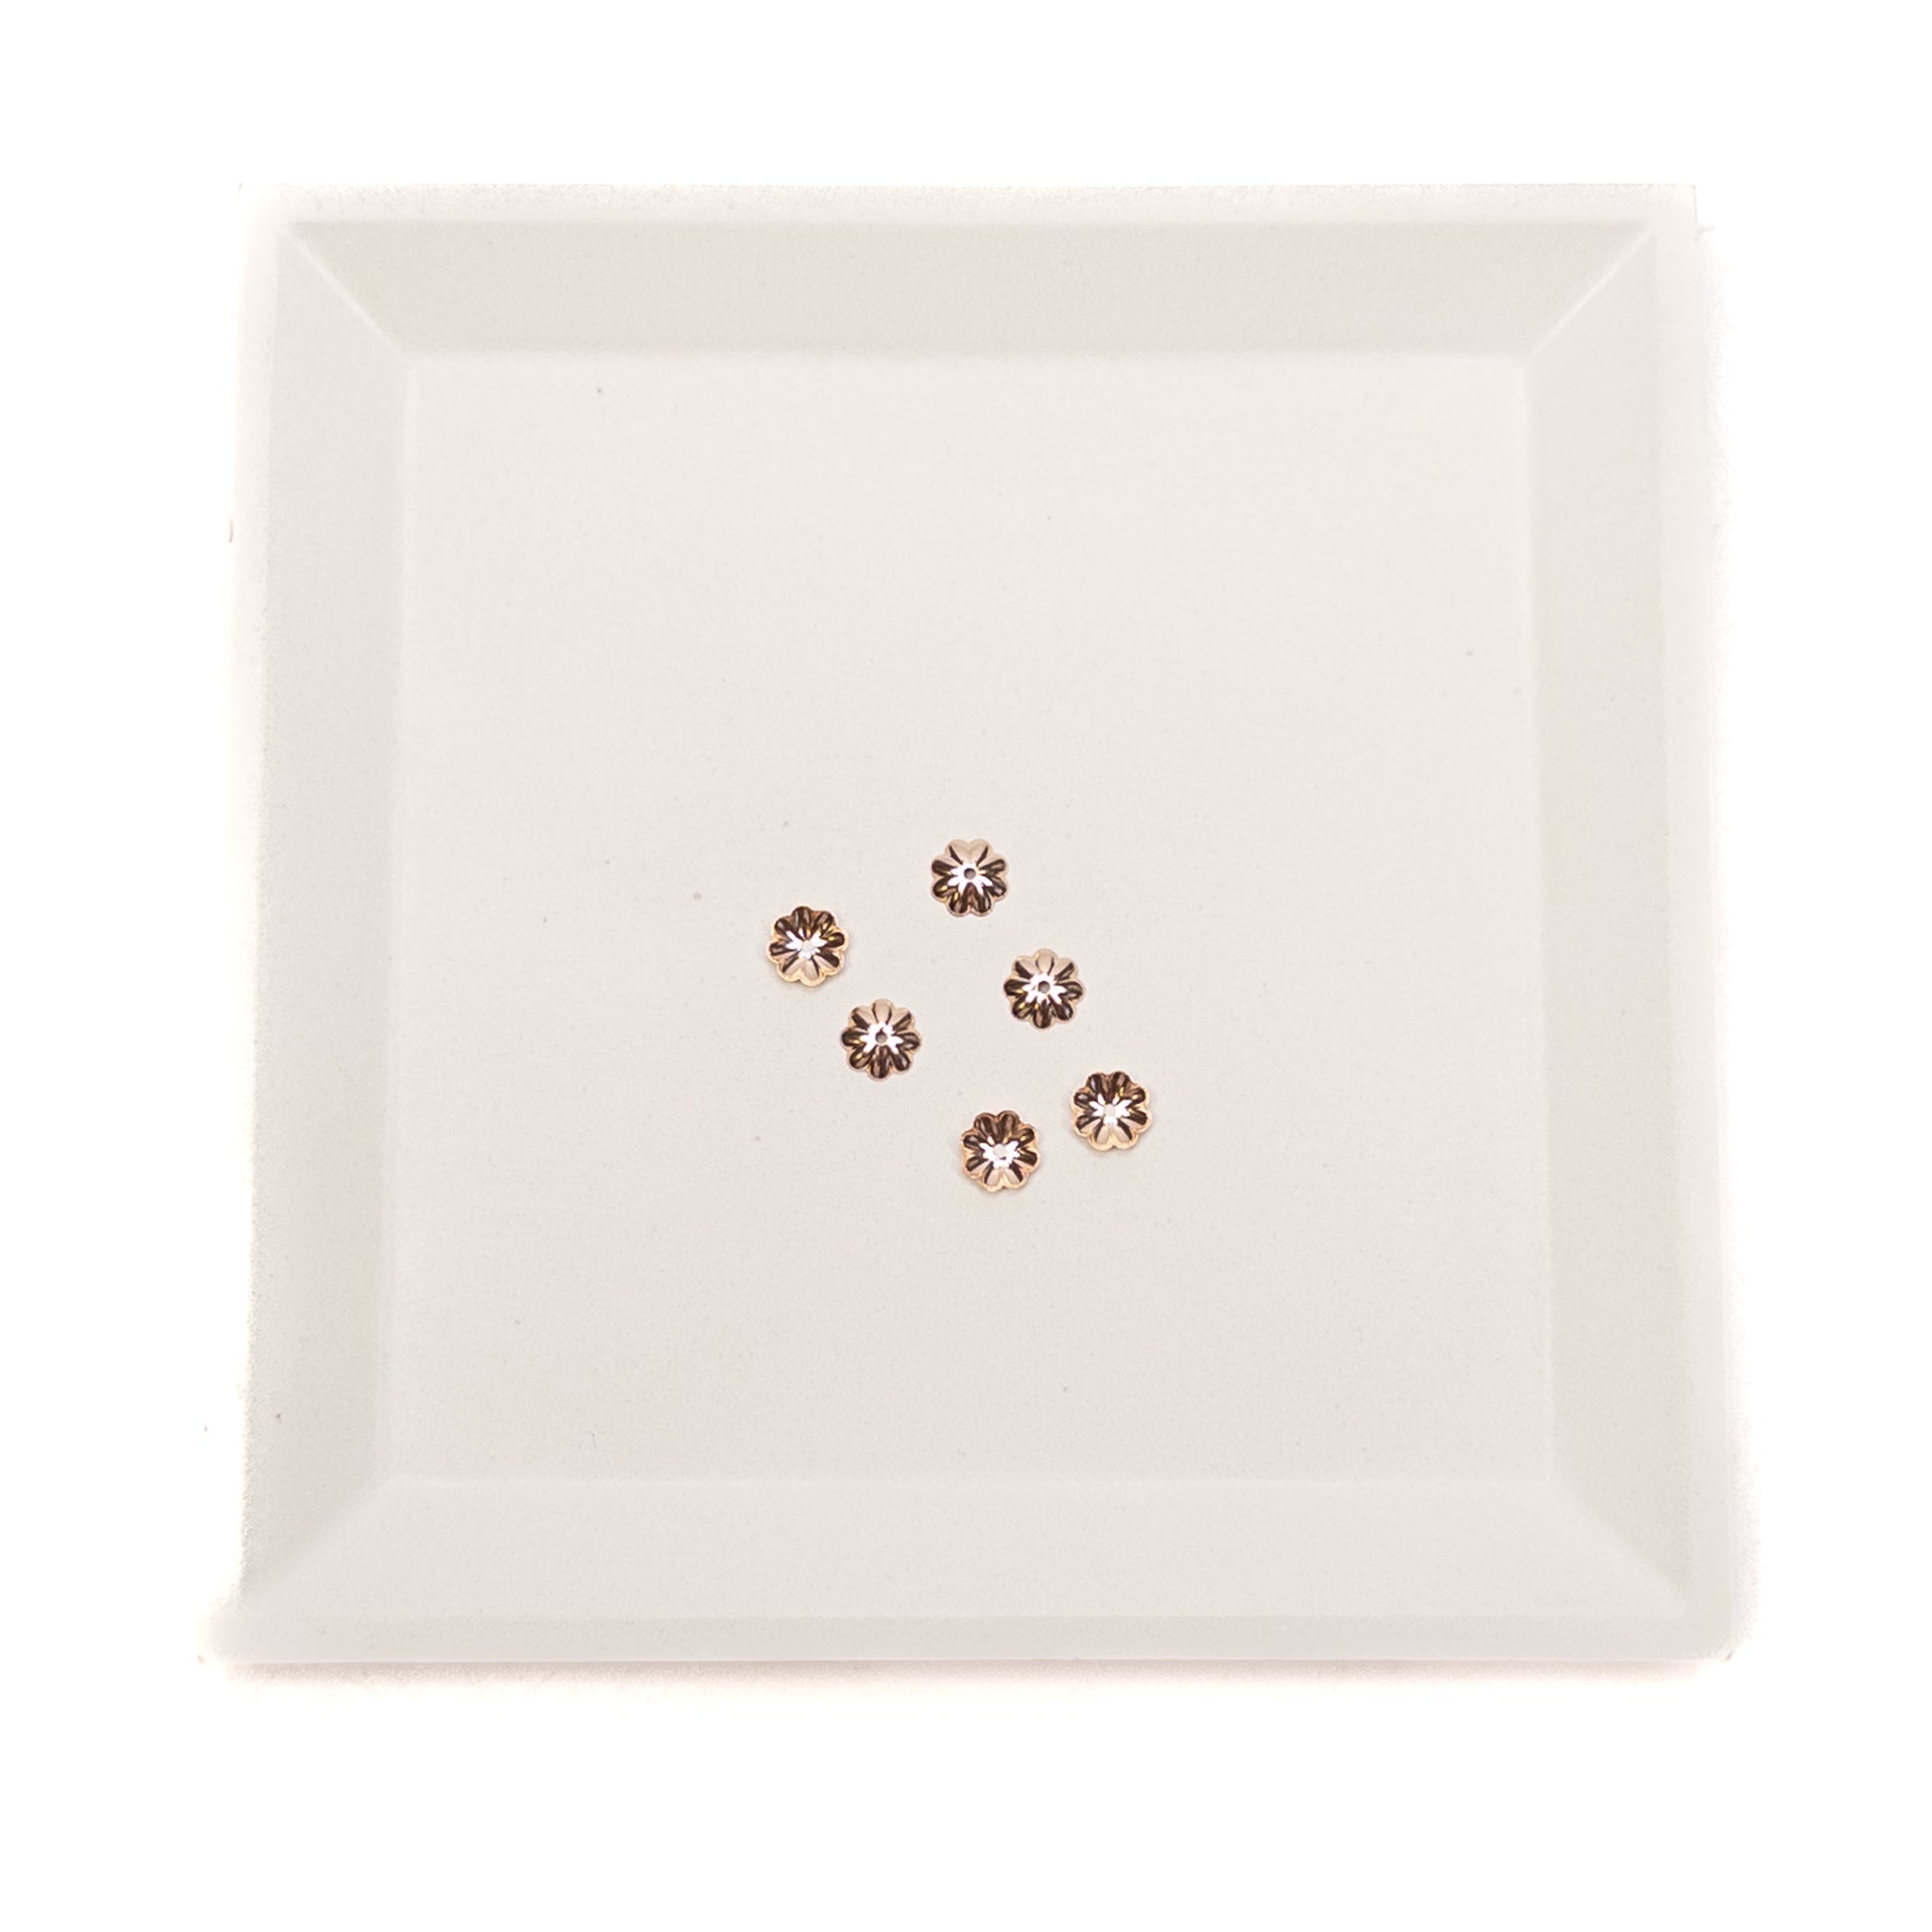 6mm Fluted Bead Cap (Rose Gold Filled) - 6 pcs.-The Bead Gallery Honolulu